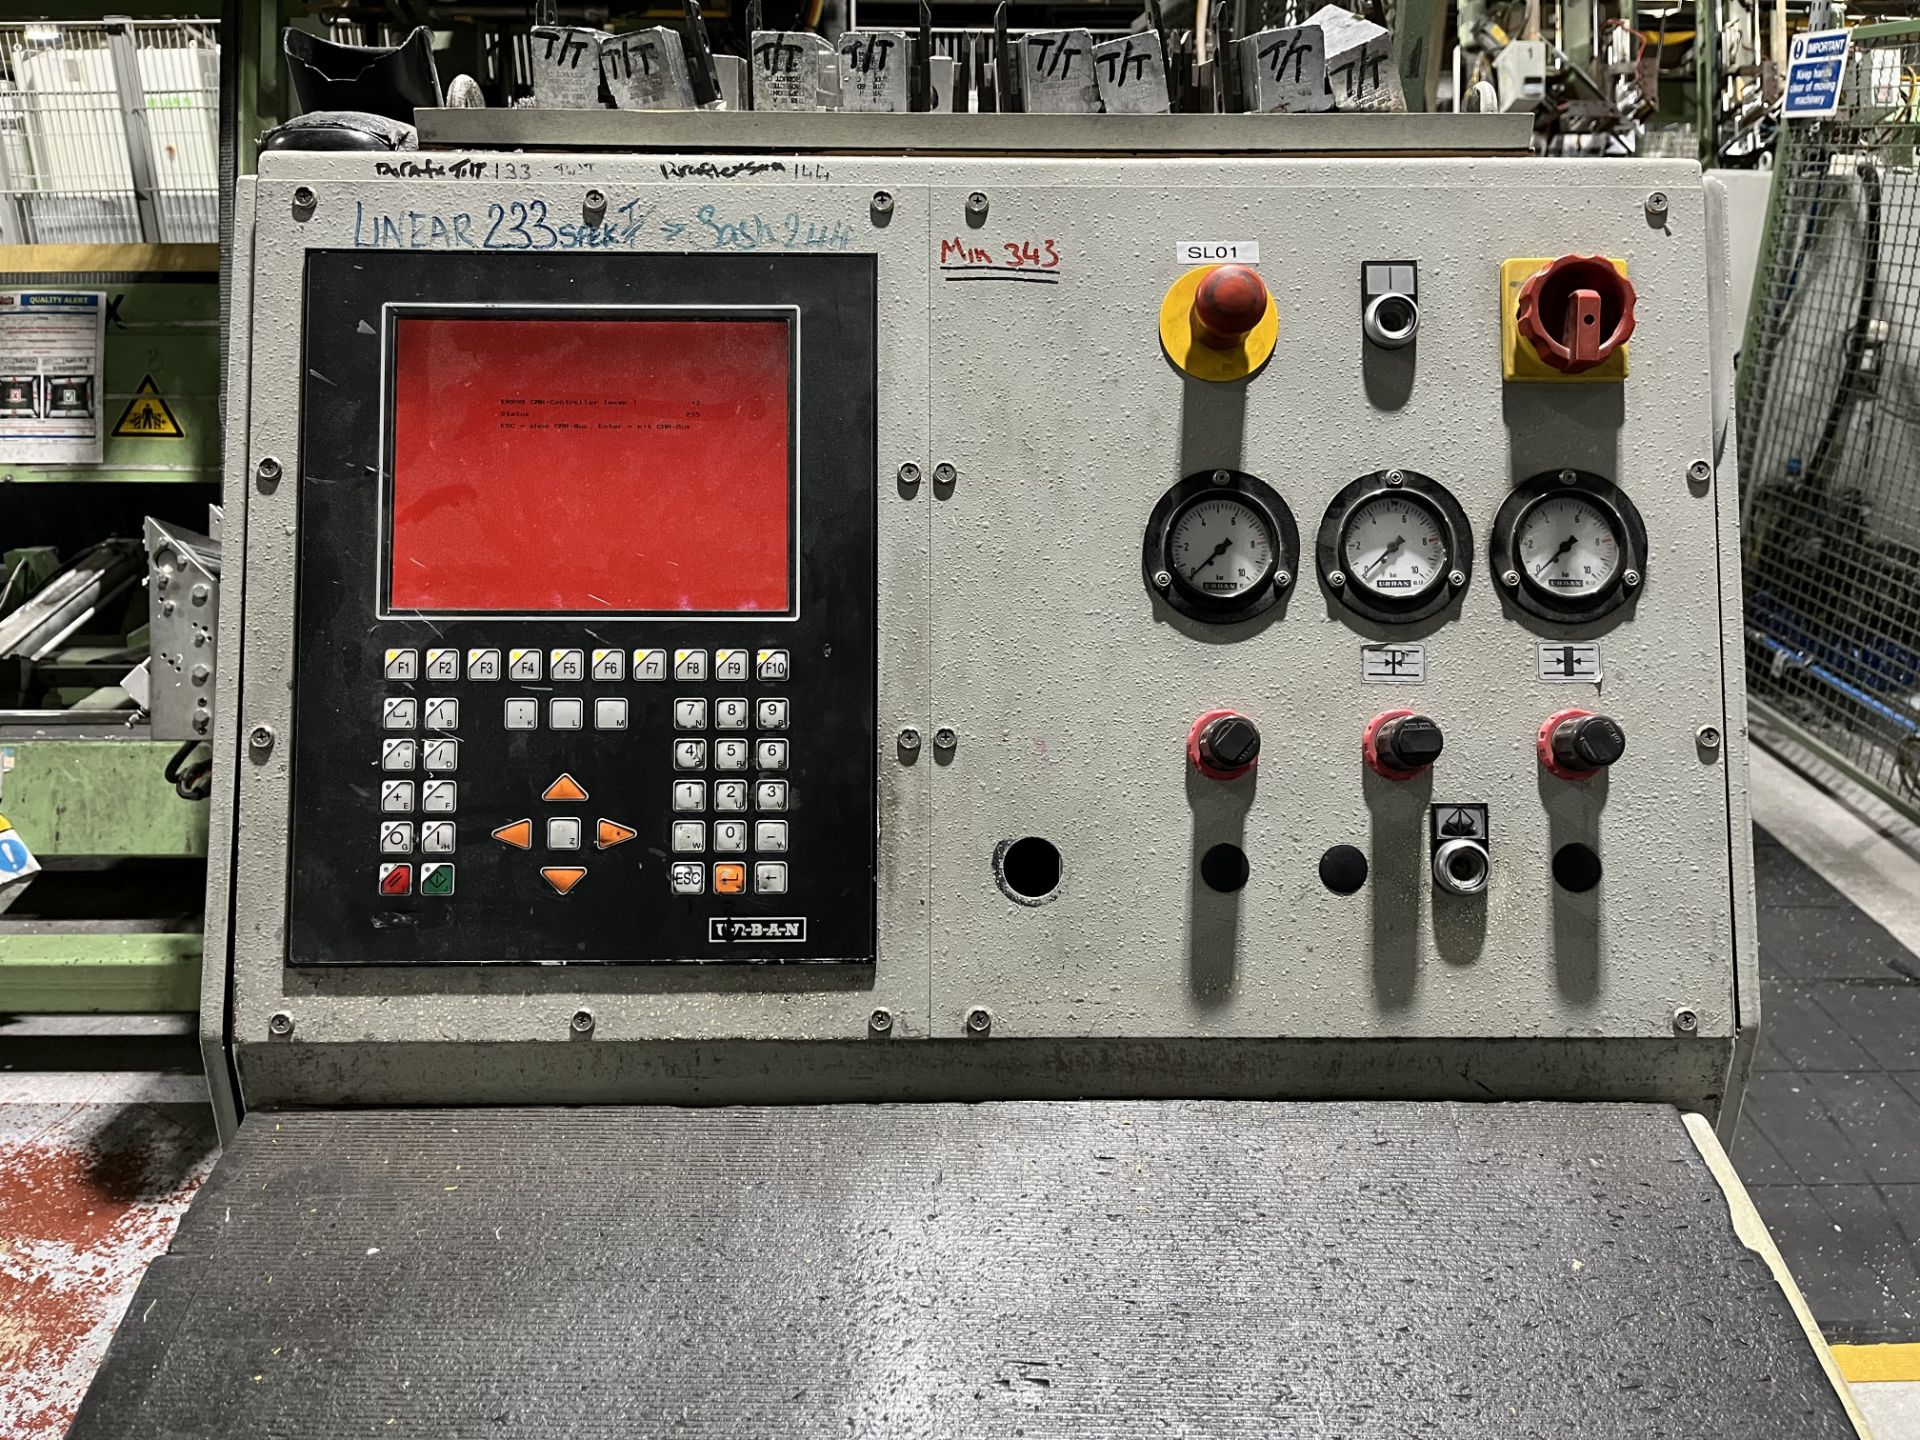 SLO 1 Urban AKS-1810T-25YL6 Vertical Quad Welder Serial No. 180068 (2007) with Control Panel, Urban - Image 3 of 3